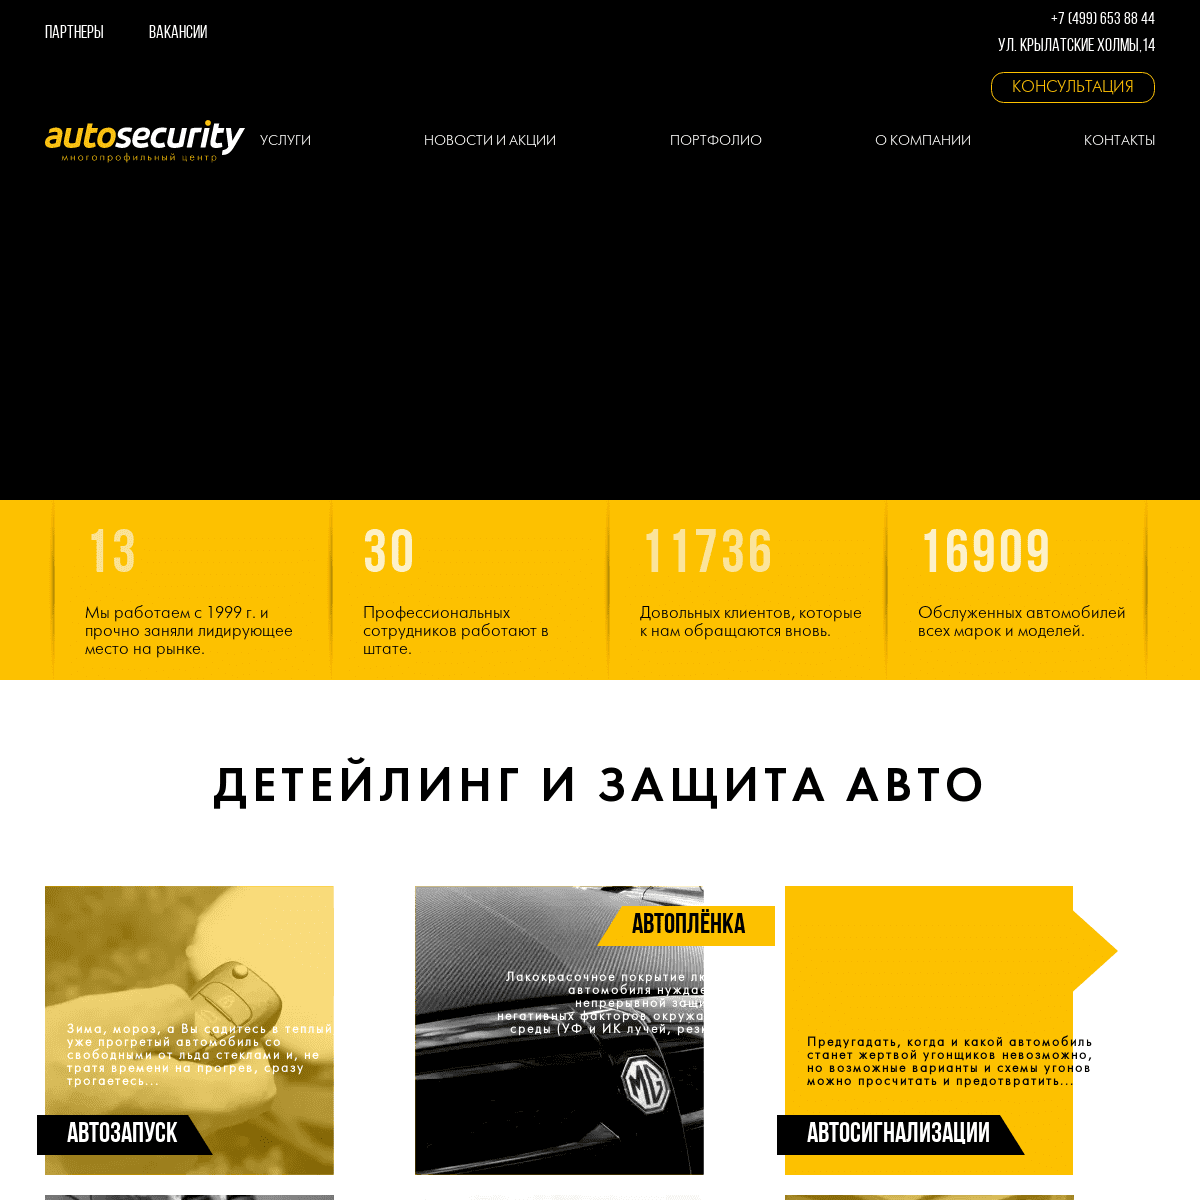 A complete backup of https://autosecurity.ru